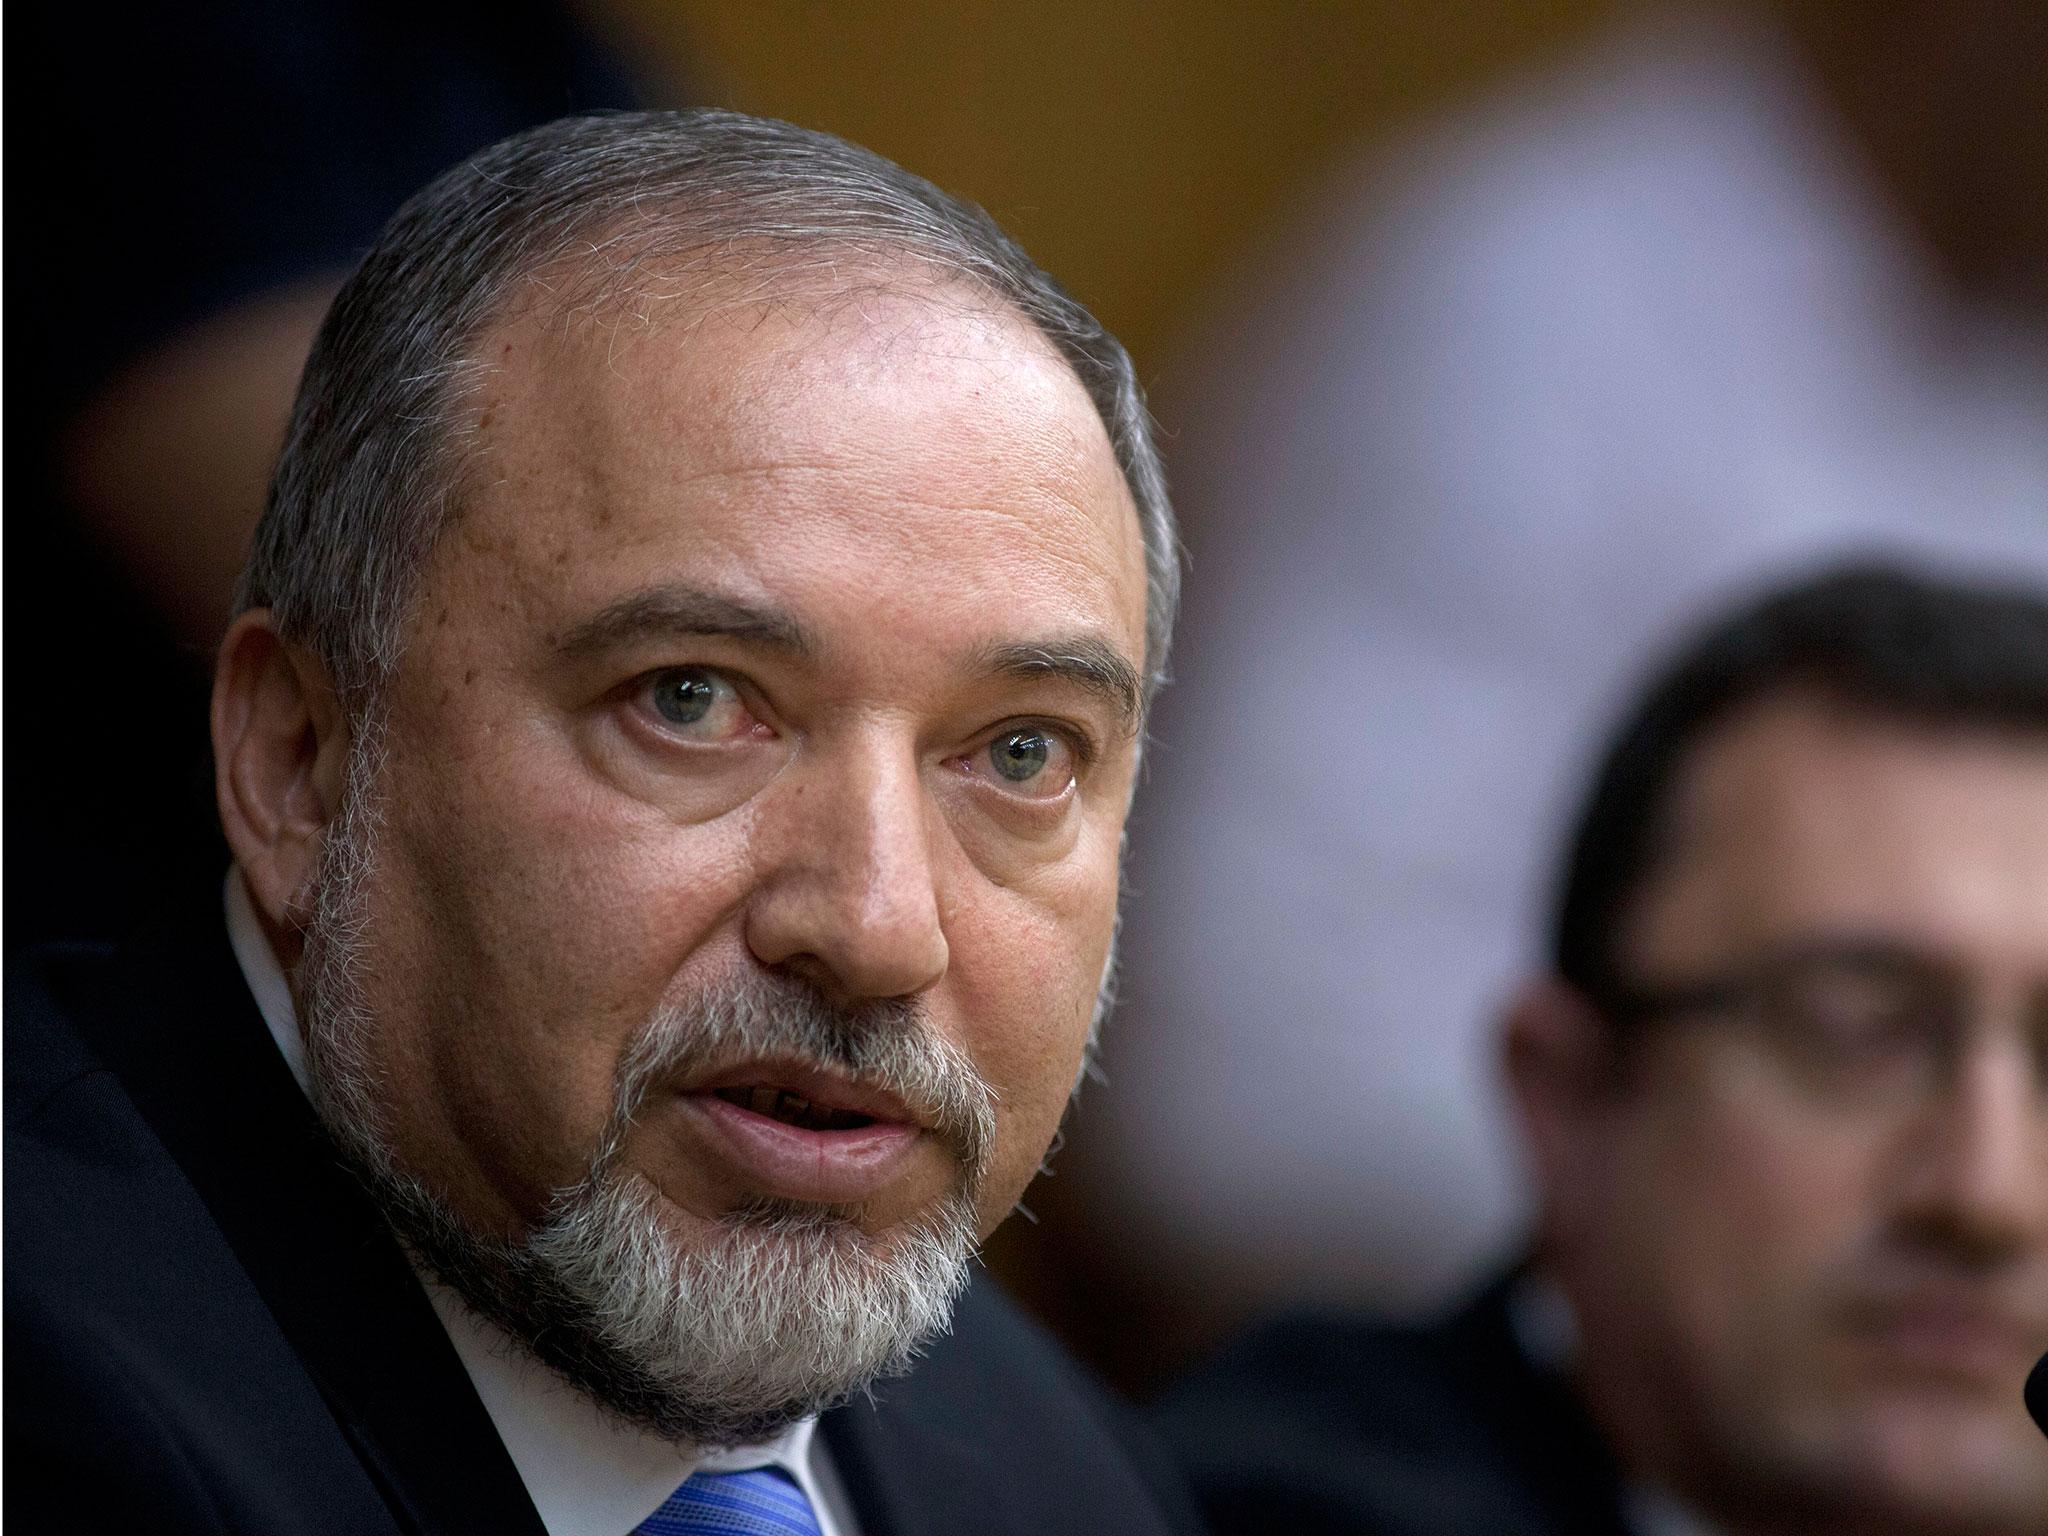 Israeli defence minister Avigdor Lieberman denied any change in Israel's settlement building policy since Donald Trump became US president